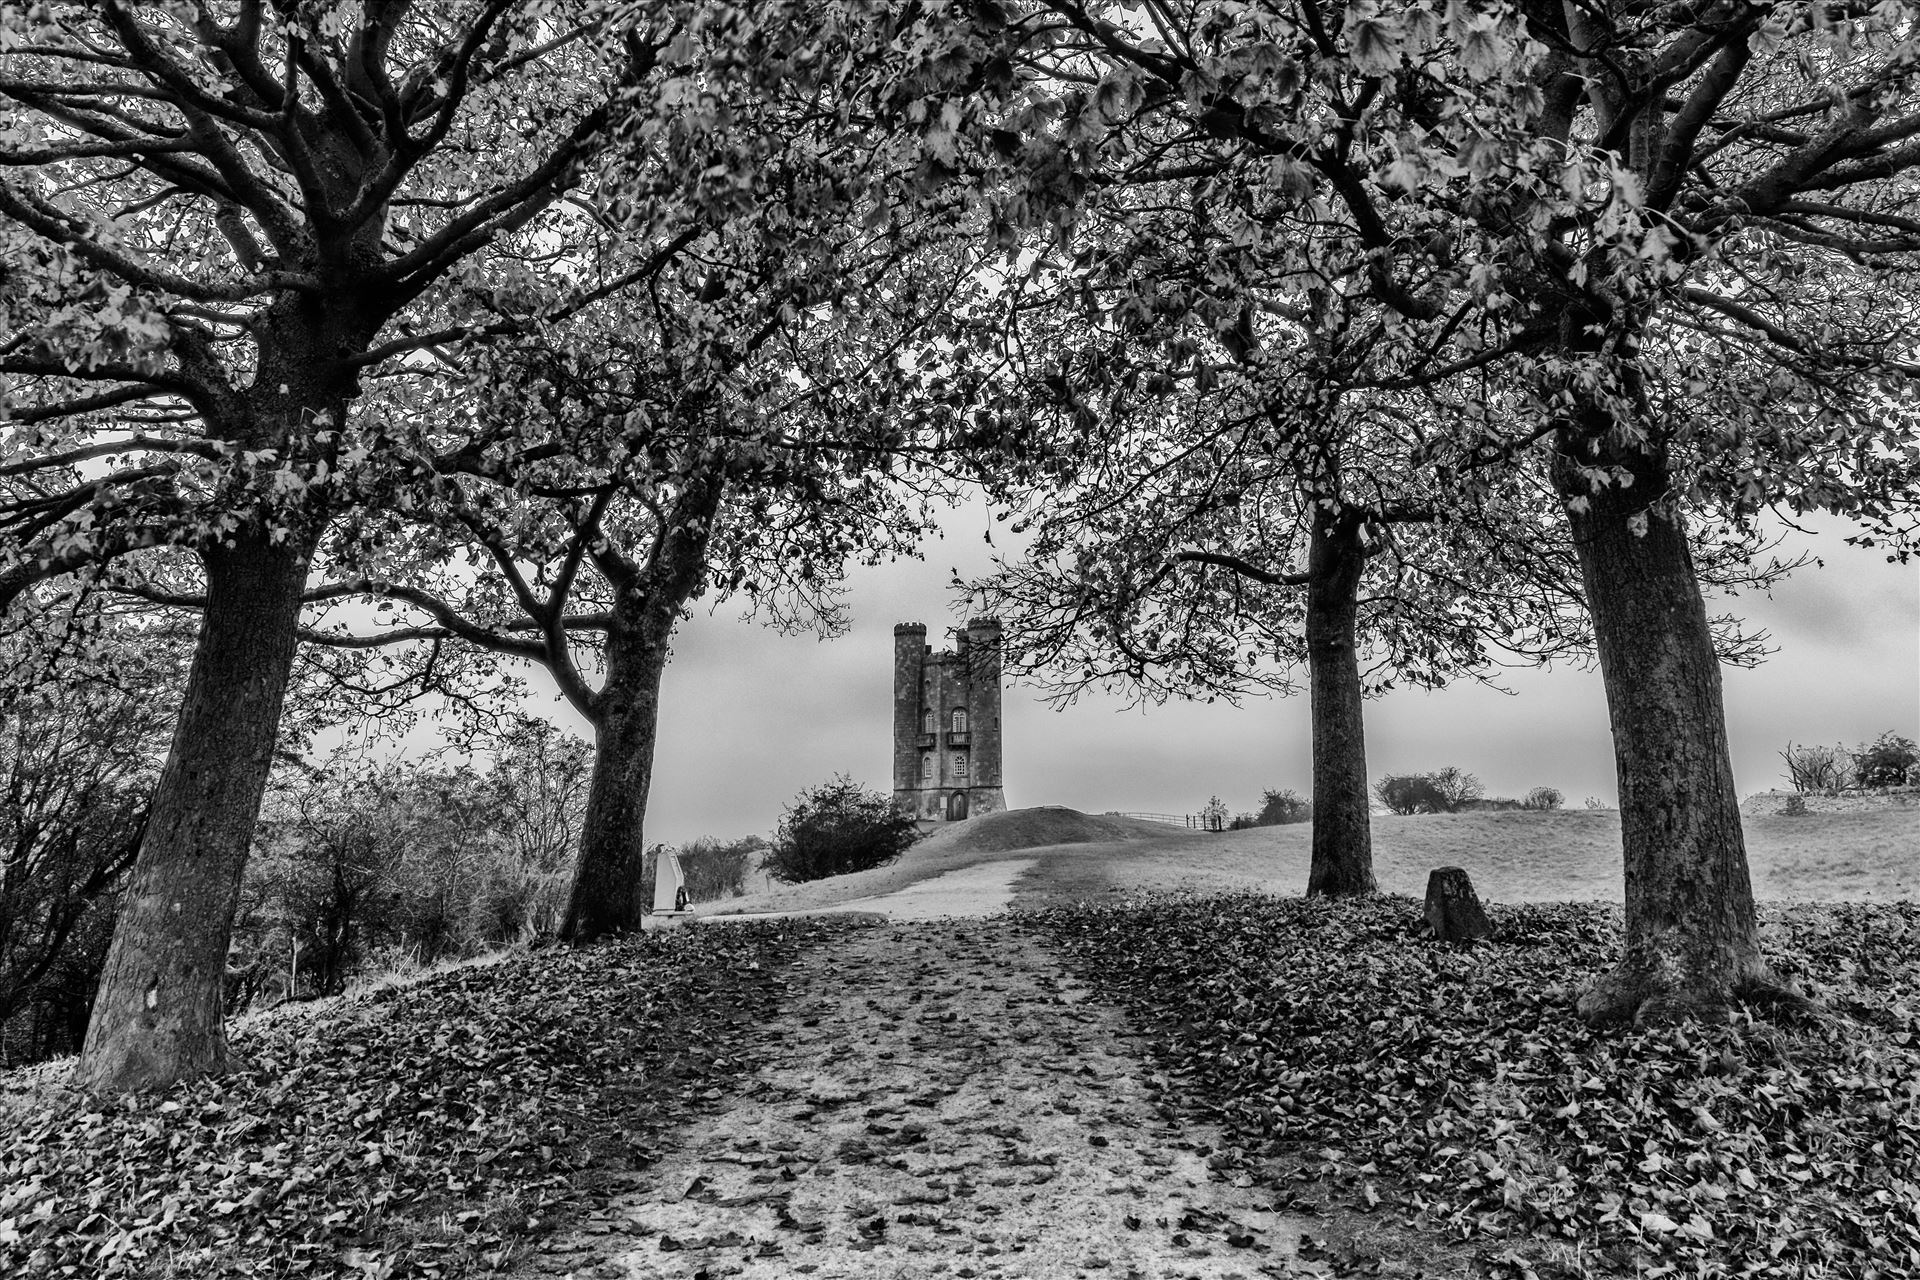 Broadway Tower Broadway Tower is a folly on Broadway Hill, near the village of Broadway,Worcestershire, at the second-highest point of the Cotswolds. The "Saxon" tower was the brainchild of Capability Brown and designed by James Wyatt in 1794. by philreay